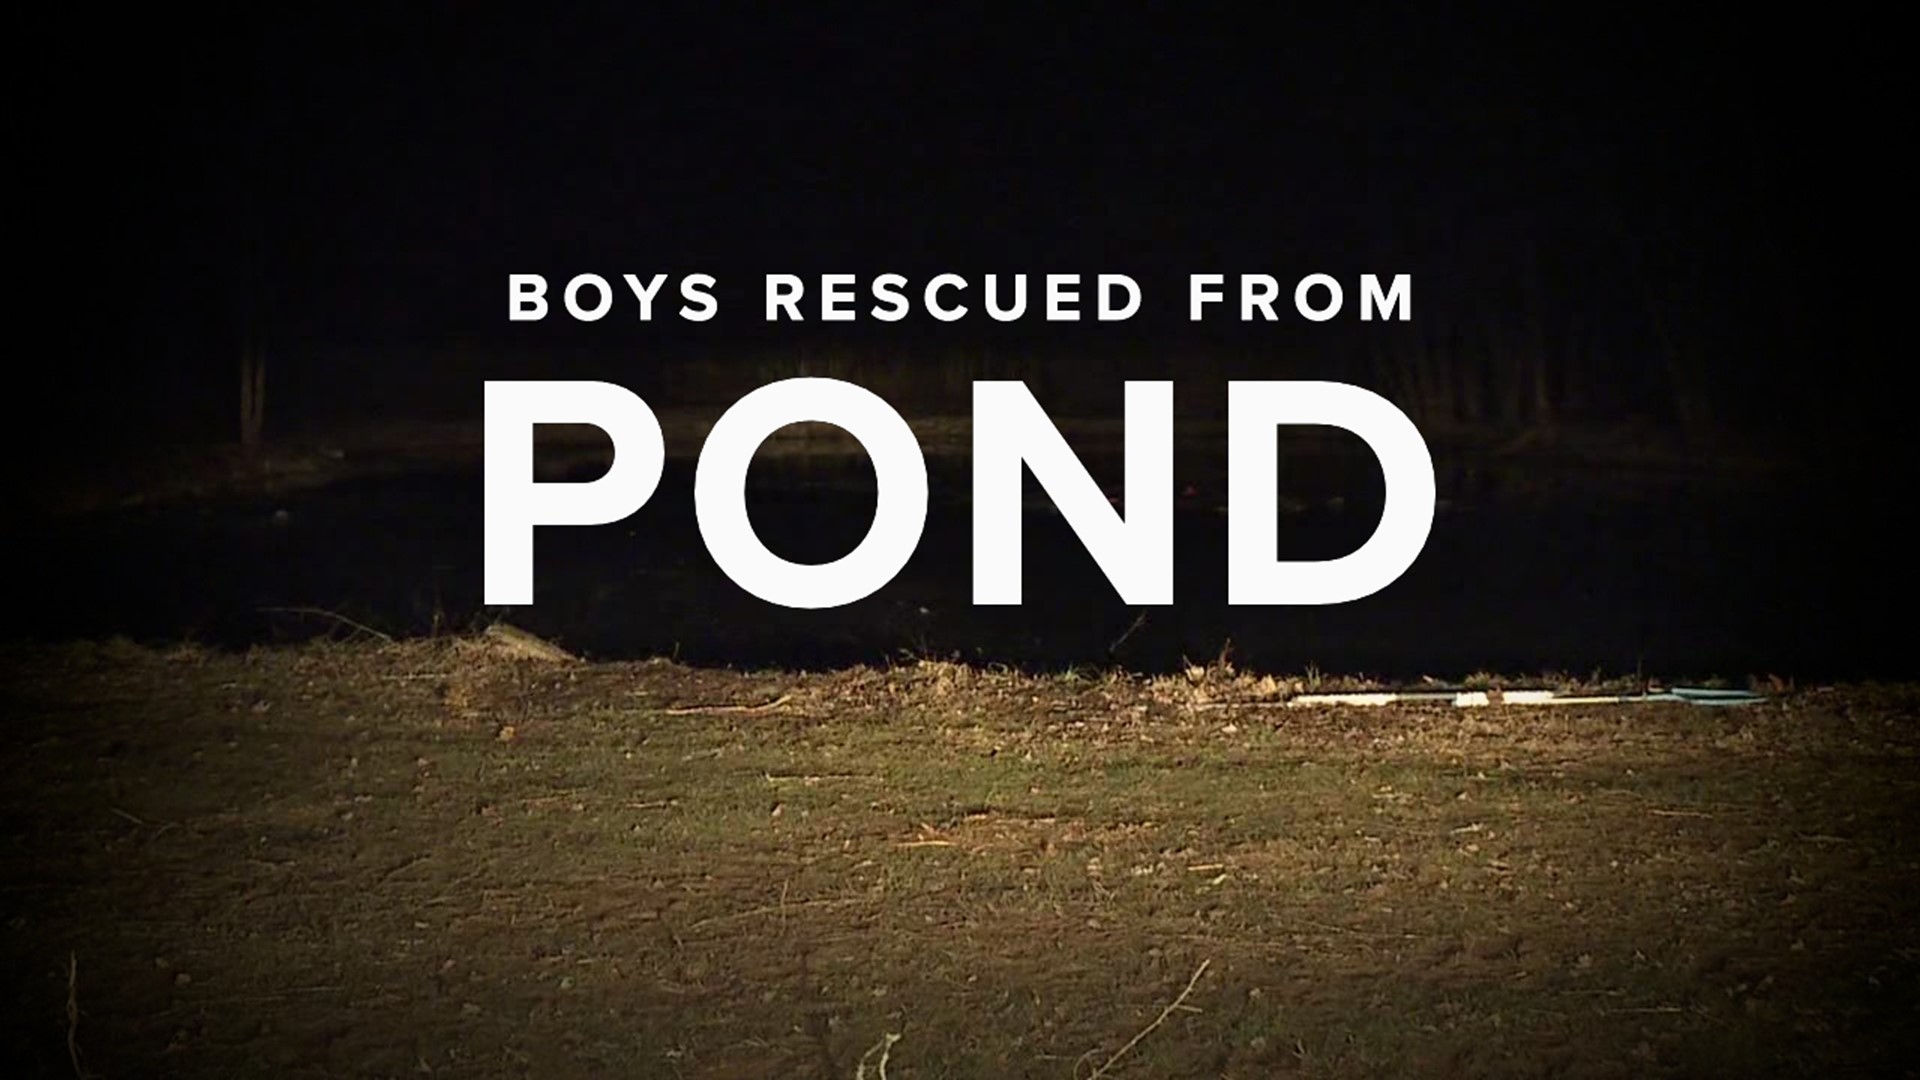 There's no word on how the boys ended up in the water, but there was a thin layer of ice on top of the pond.